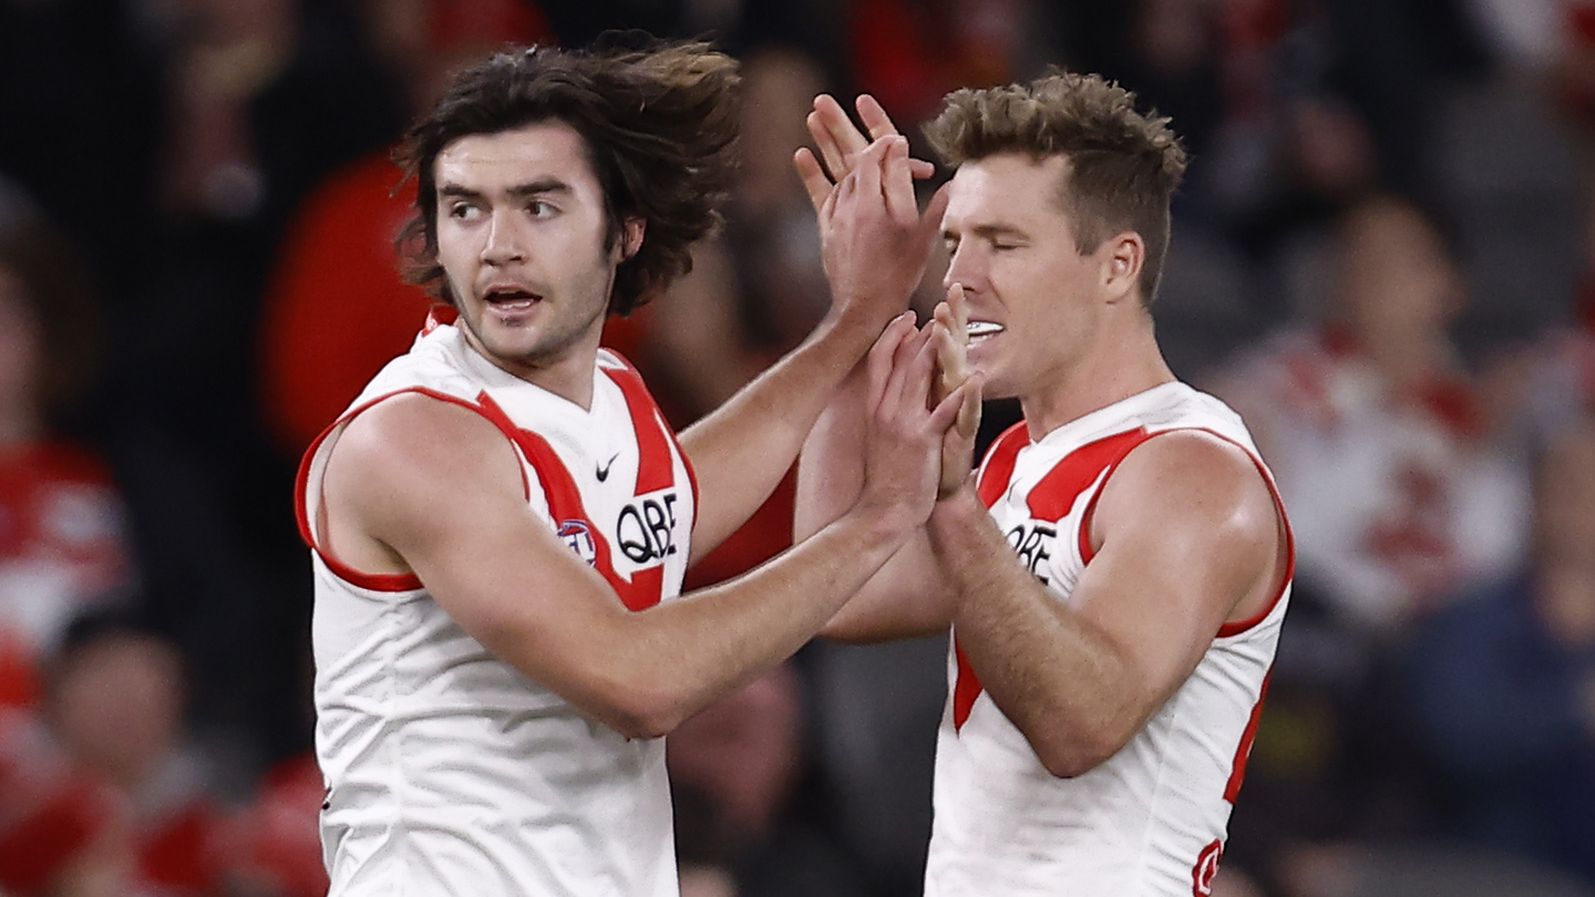 AFL grand final 2022 Ultimate Guide: Swans brutally axe young gun; Aussie megastar added to blockbuster entertainment line-up